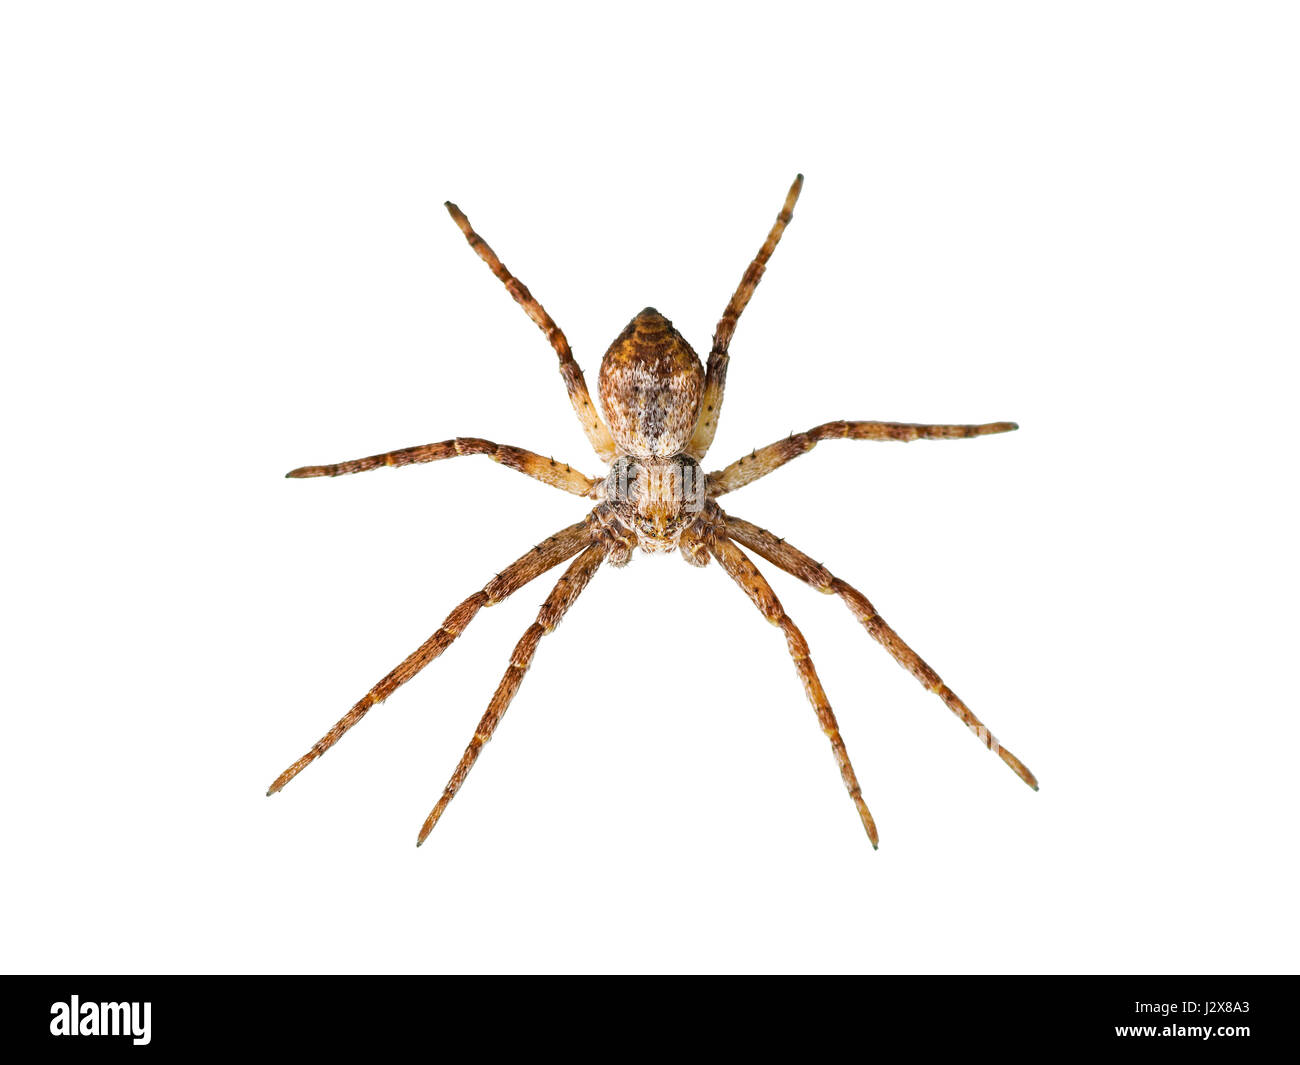 Scary Spider Isolated on White Stock Photo